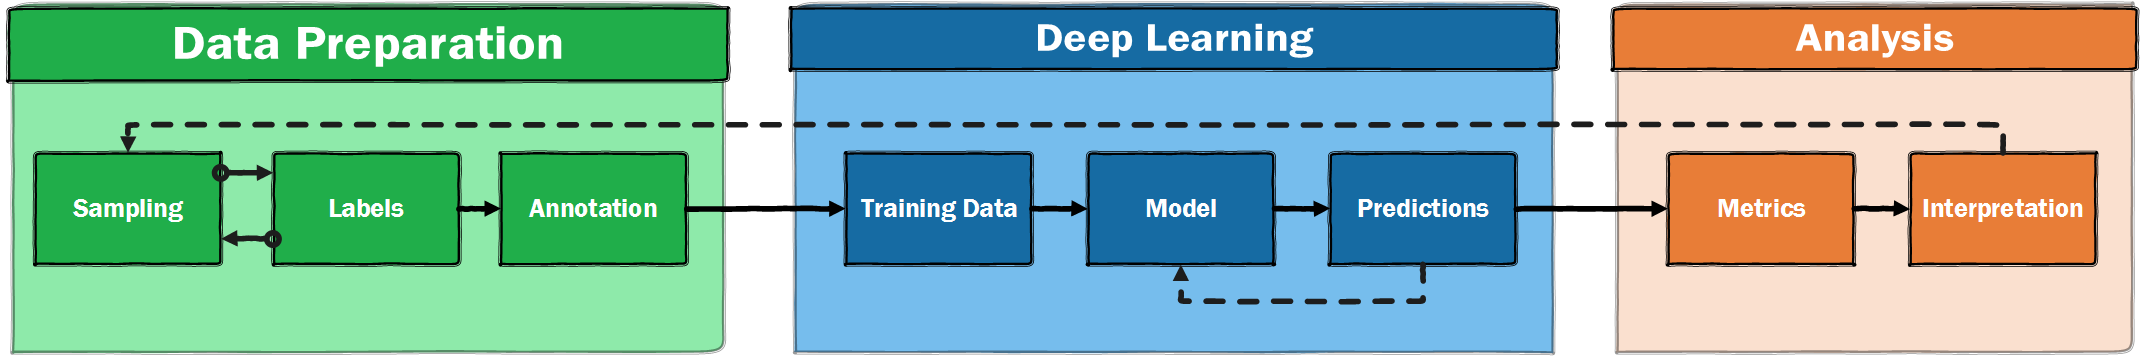 This diagram repeats the workflow diagram for machine learning shown previously but adds additional arrows showing that each stage of the workflow feedbacks to earlier steps